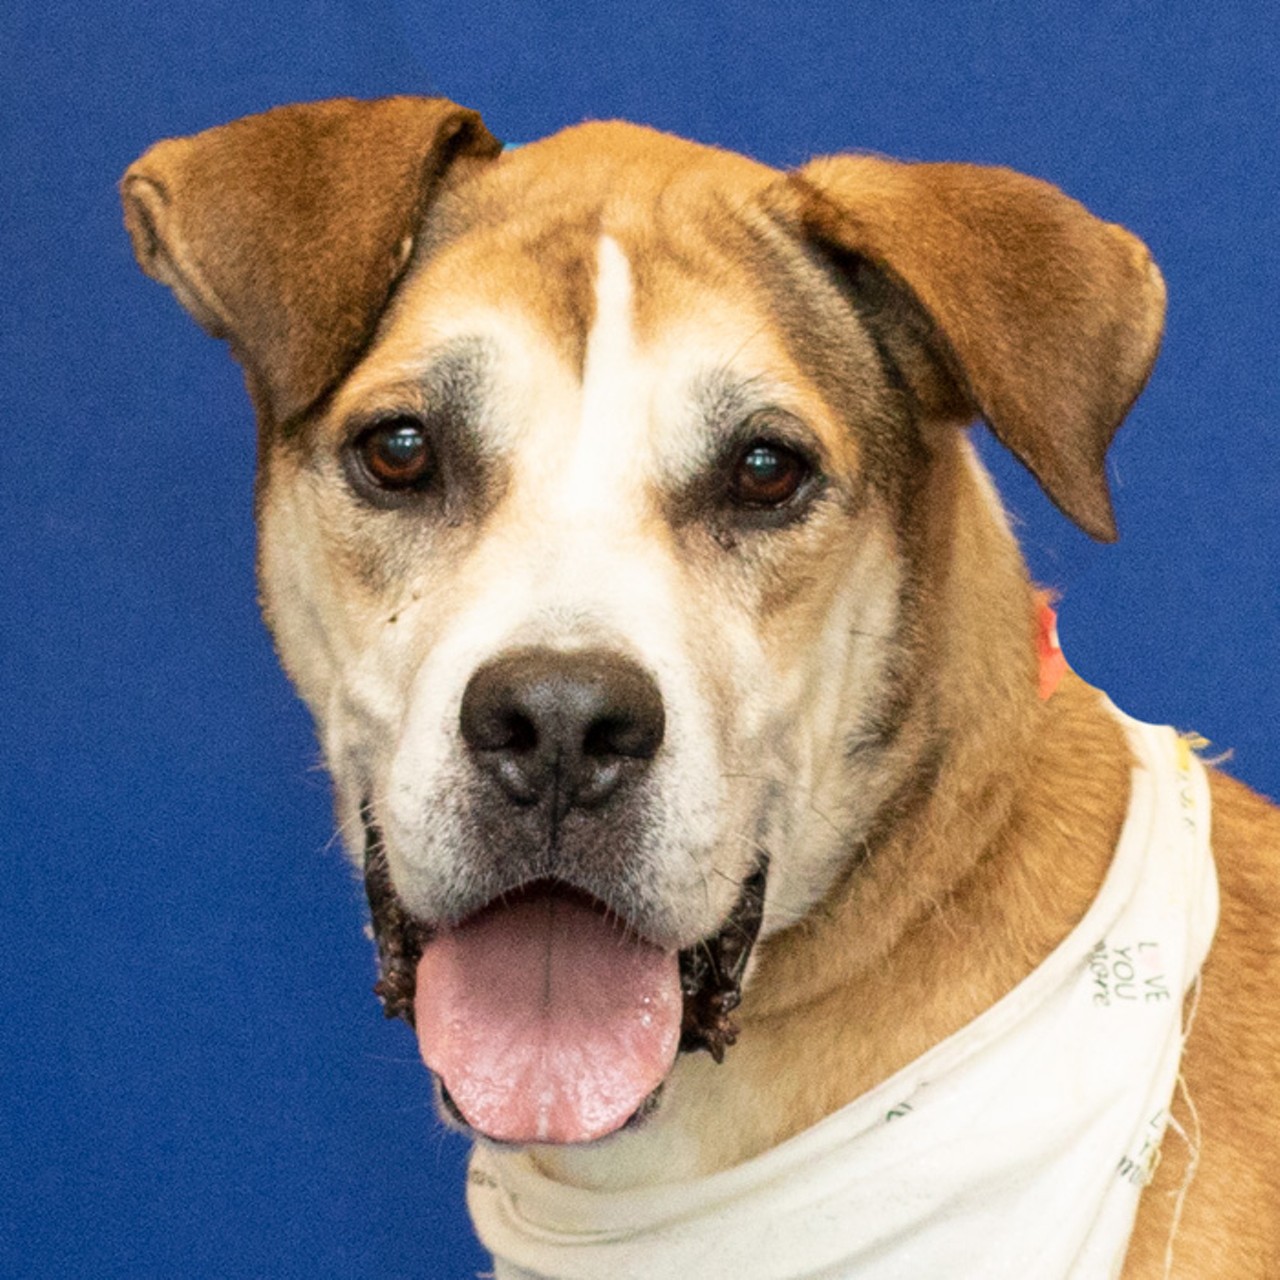 NAME:Gayle 
GENDER: Female
BREED: Shepherd-Hound mix 
AGE: 6 years, 1 month 
WEIGHT: 54 pounds
SPECIAL CONSIDERATIONS: Gayle prefers a home with older or no children and no other pets. 
REASON I CAME TO MHS: Homeless in Redford 
LOCATION: Berman Center for Animal Care in Westland 
ID NUMBER: 868803 